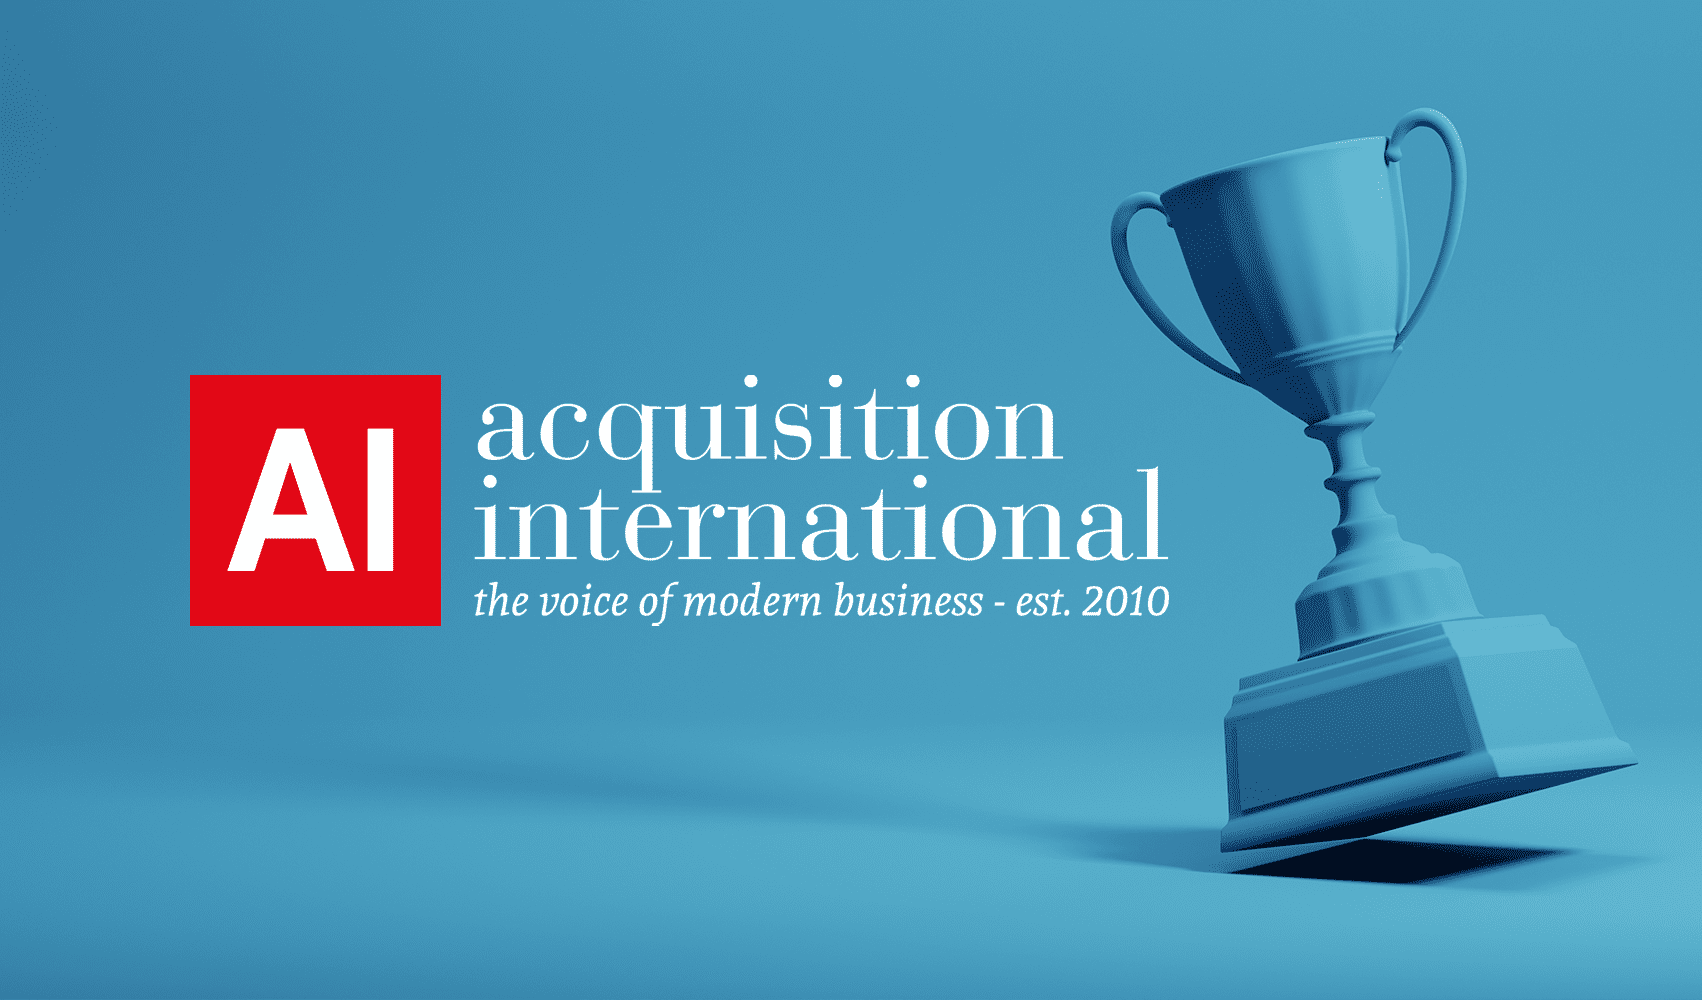 Blue trophy representing acquisition international award